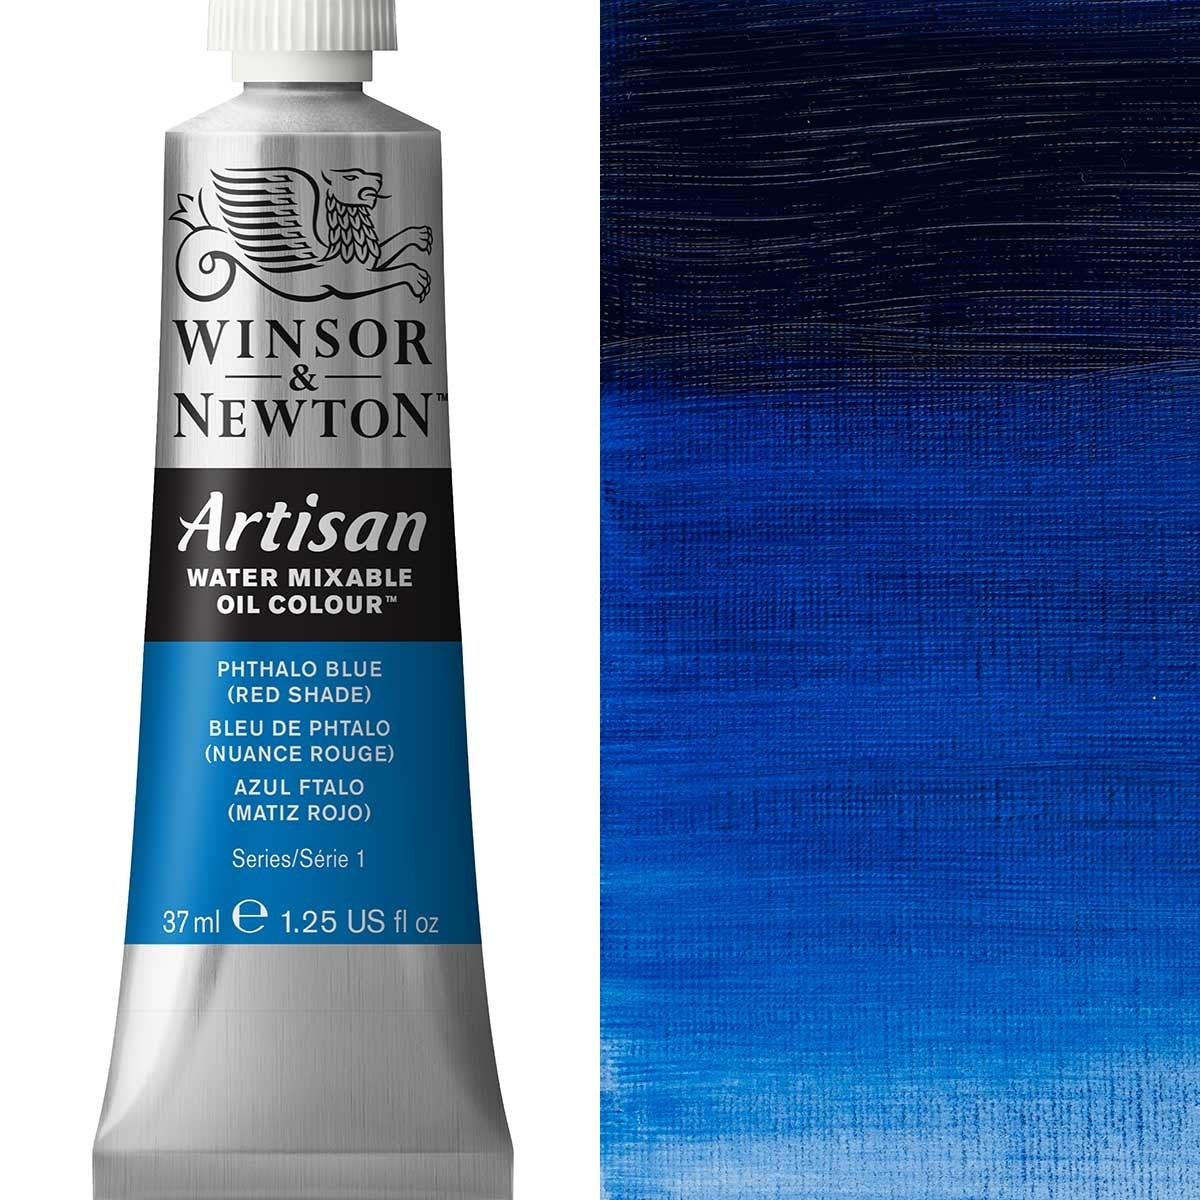 Winsor et Newton - Couleur d'huile artisanale Watermixable - 37 ml - Phthalo Blue Red Shade